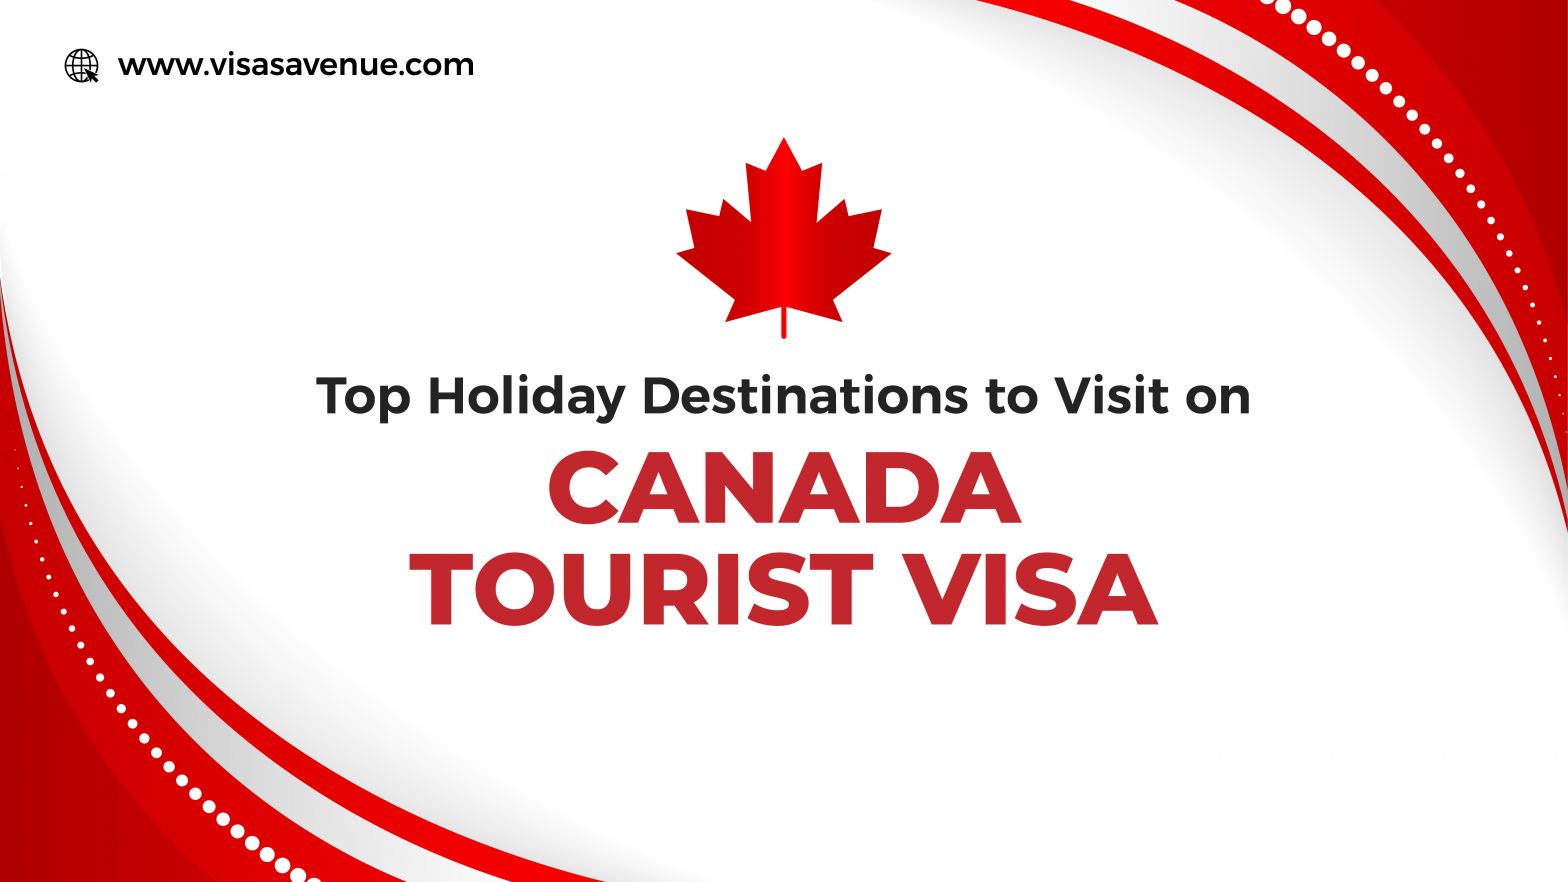 Top Holiday Destinations to Visit on Canada Tourist Visa